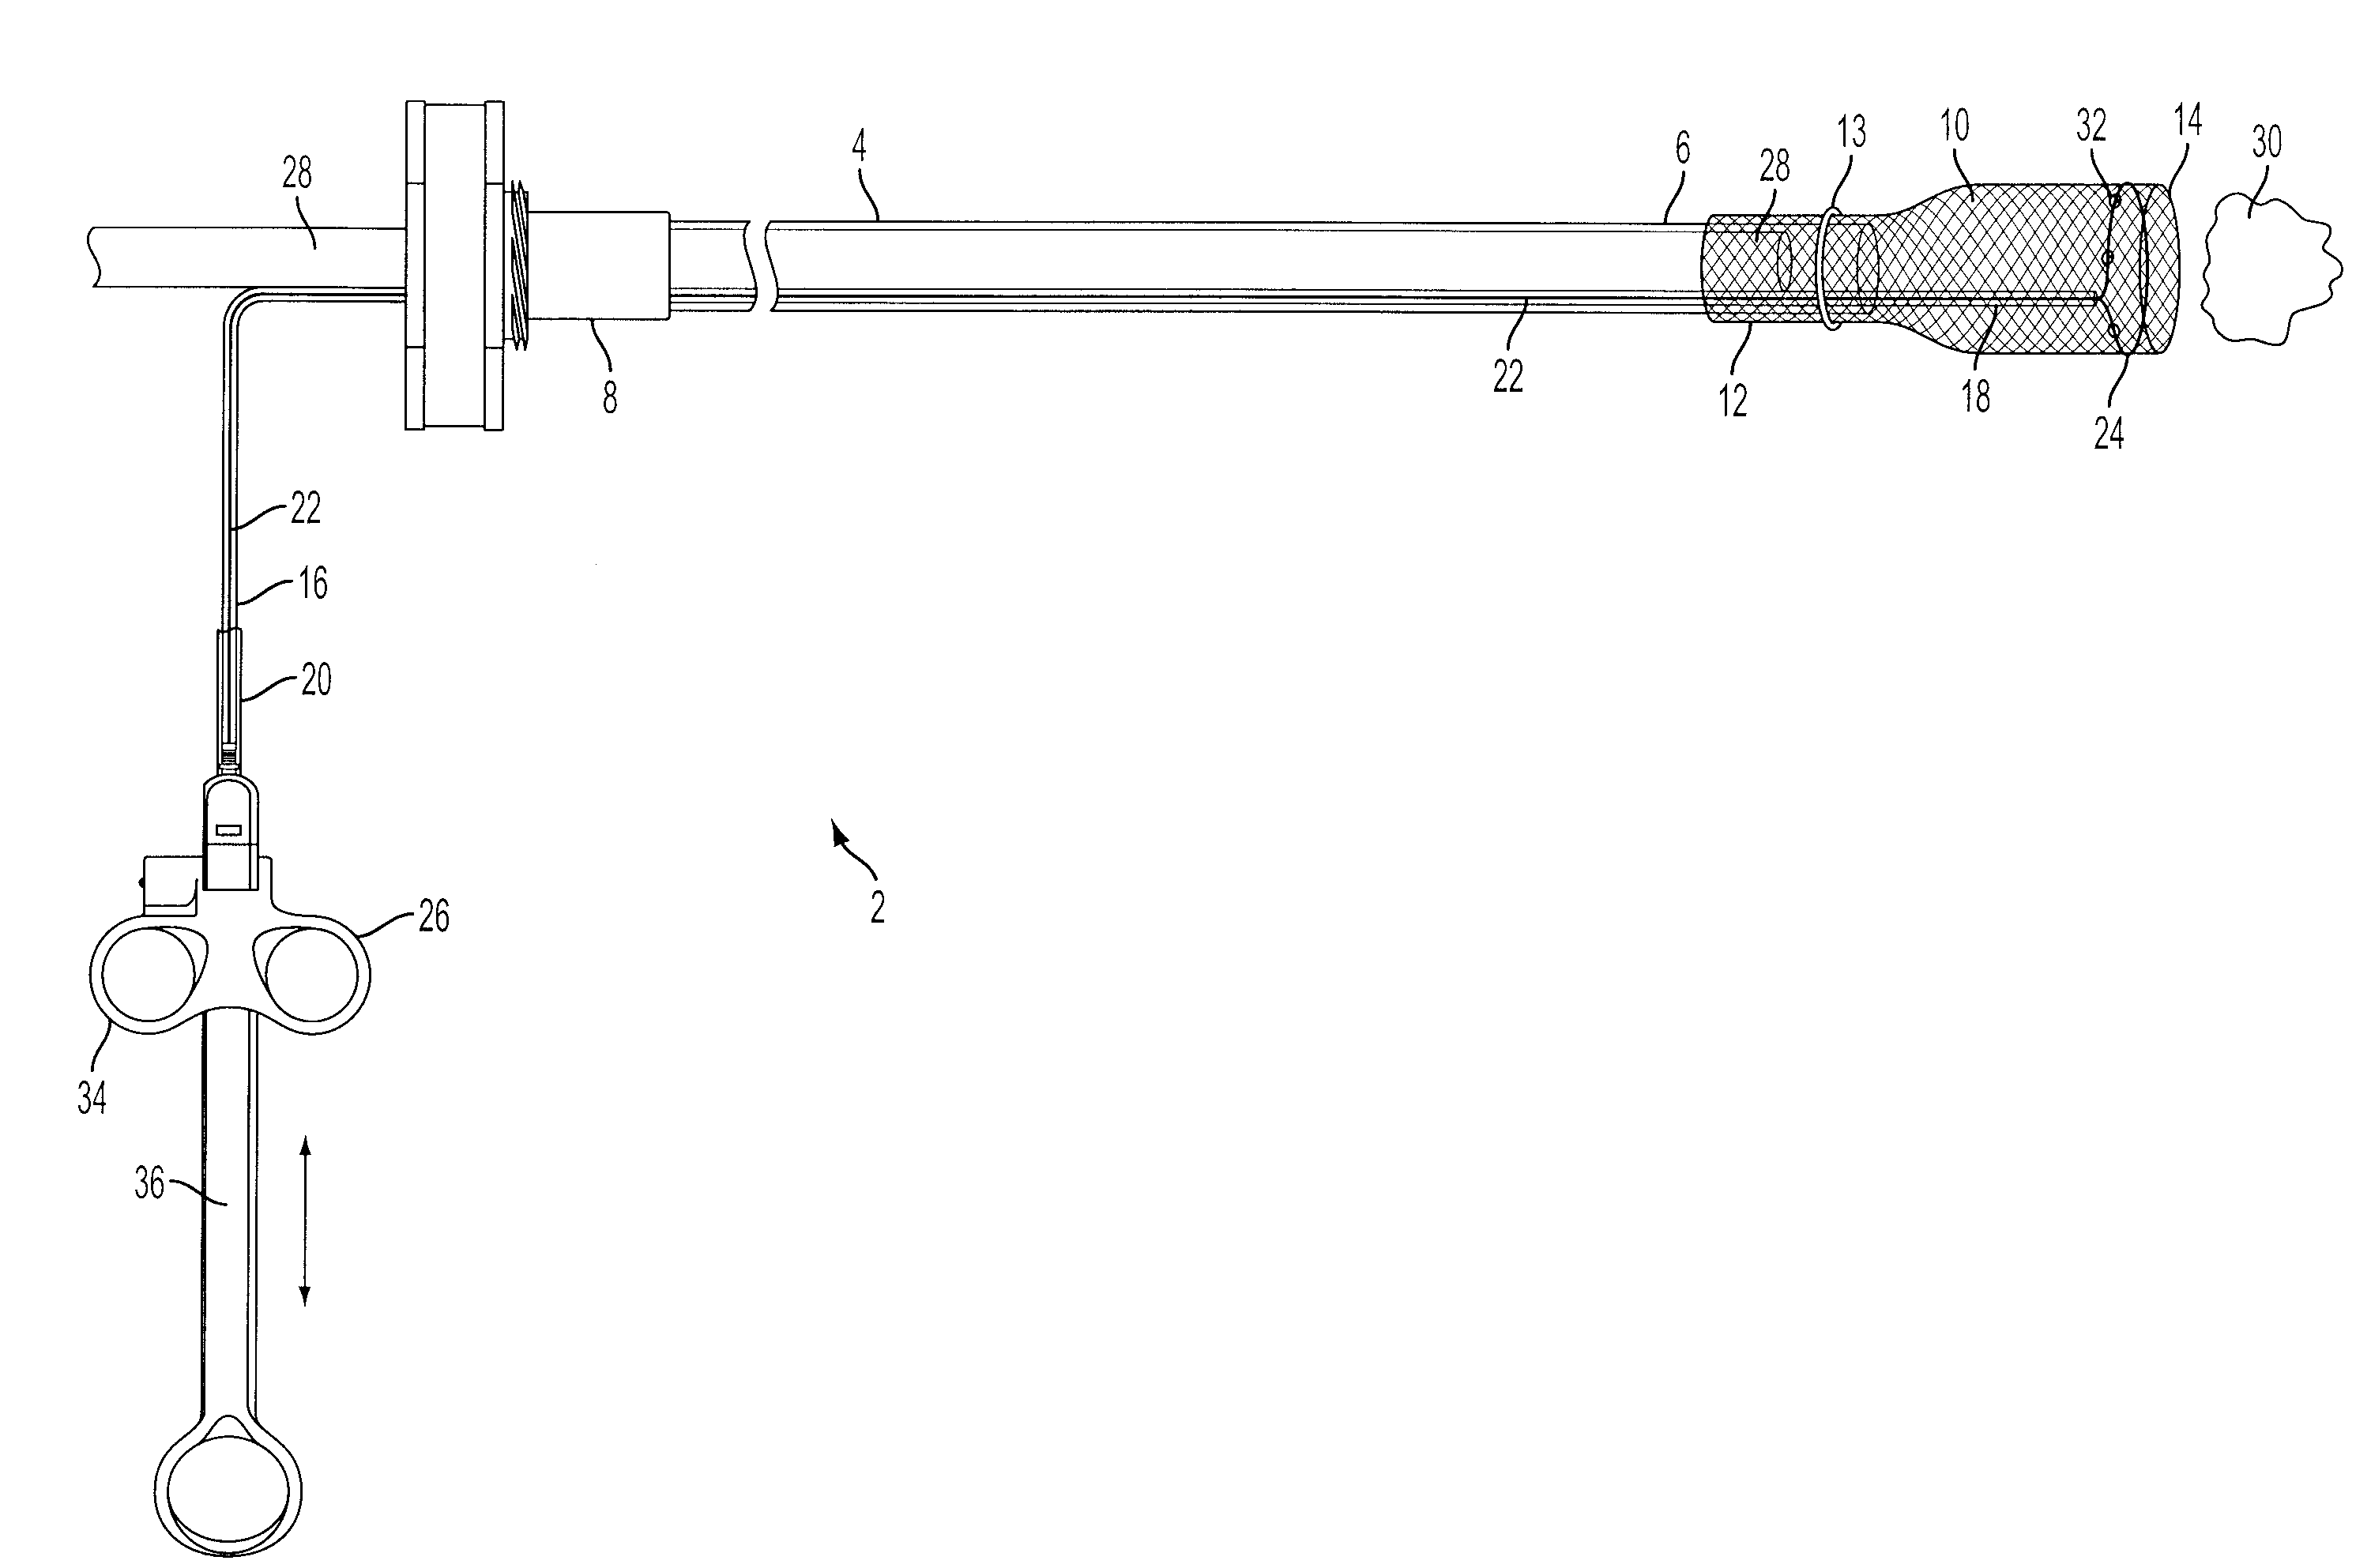 Apparatus and method for removal of foreign matter from a patient